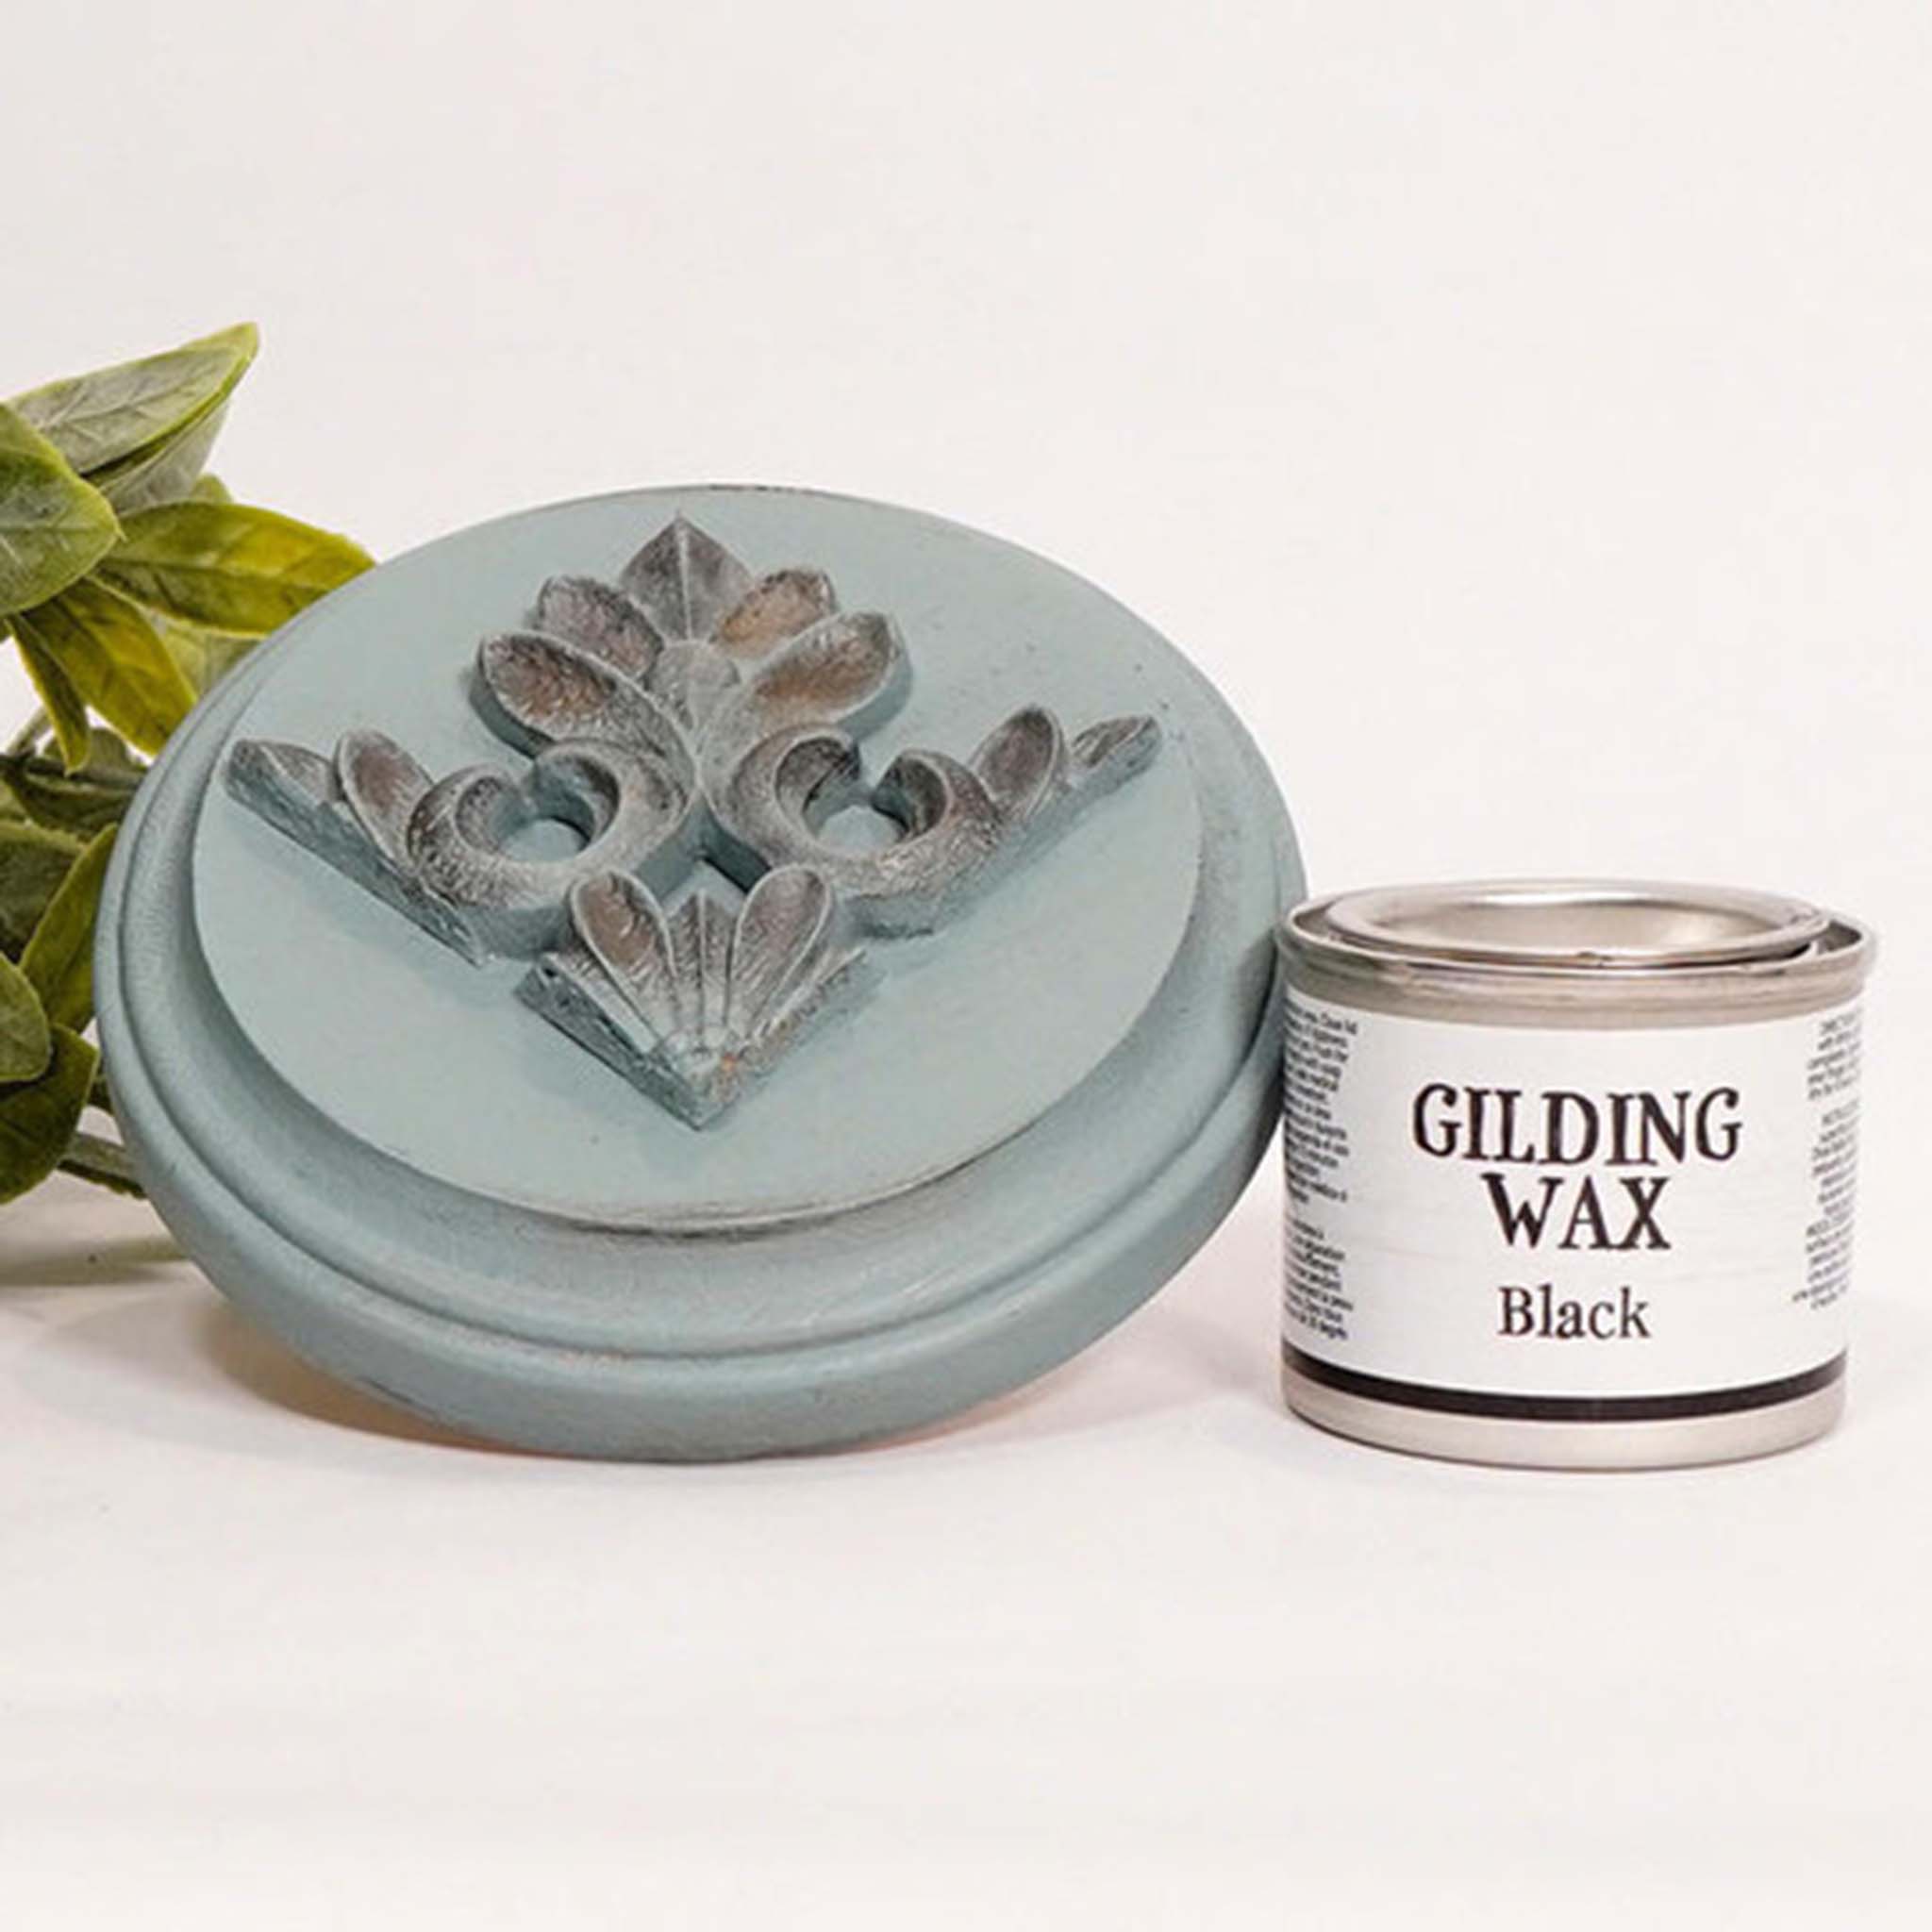 A can of Dixie Belle's Black Gilding wax is next to a light blue painted round wood sample. The wood sample has an ornate silicone mold casting that features the black gilding wax on it.